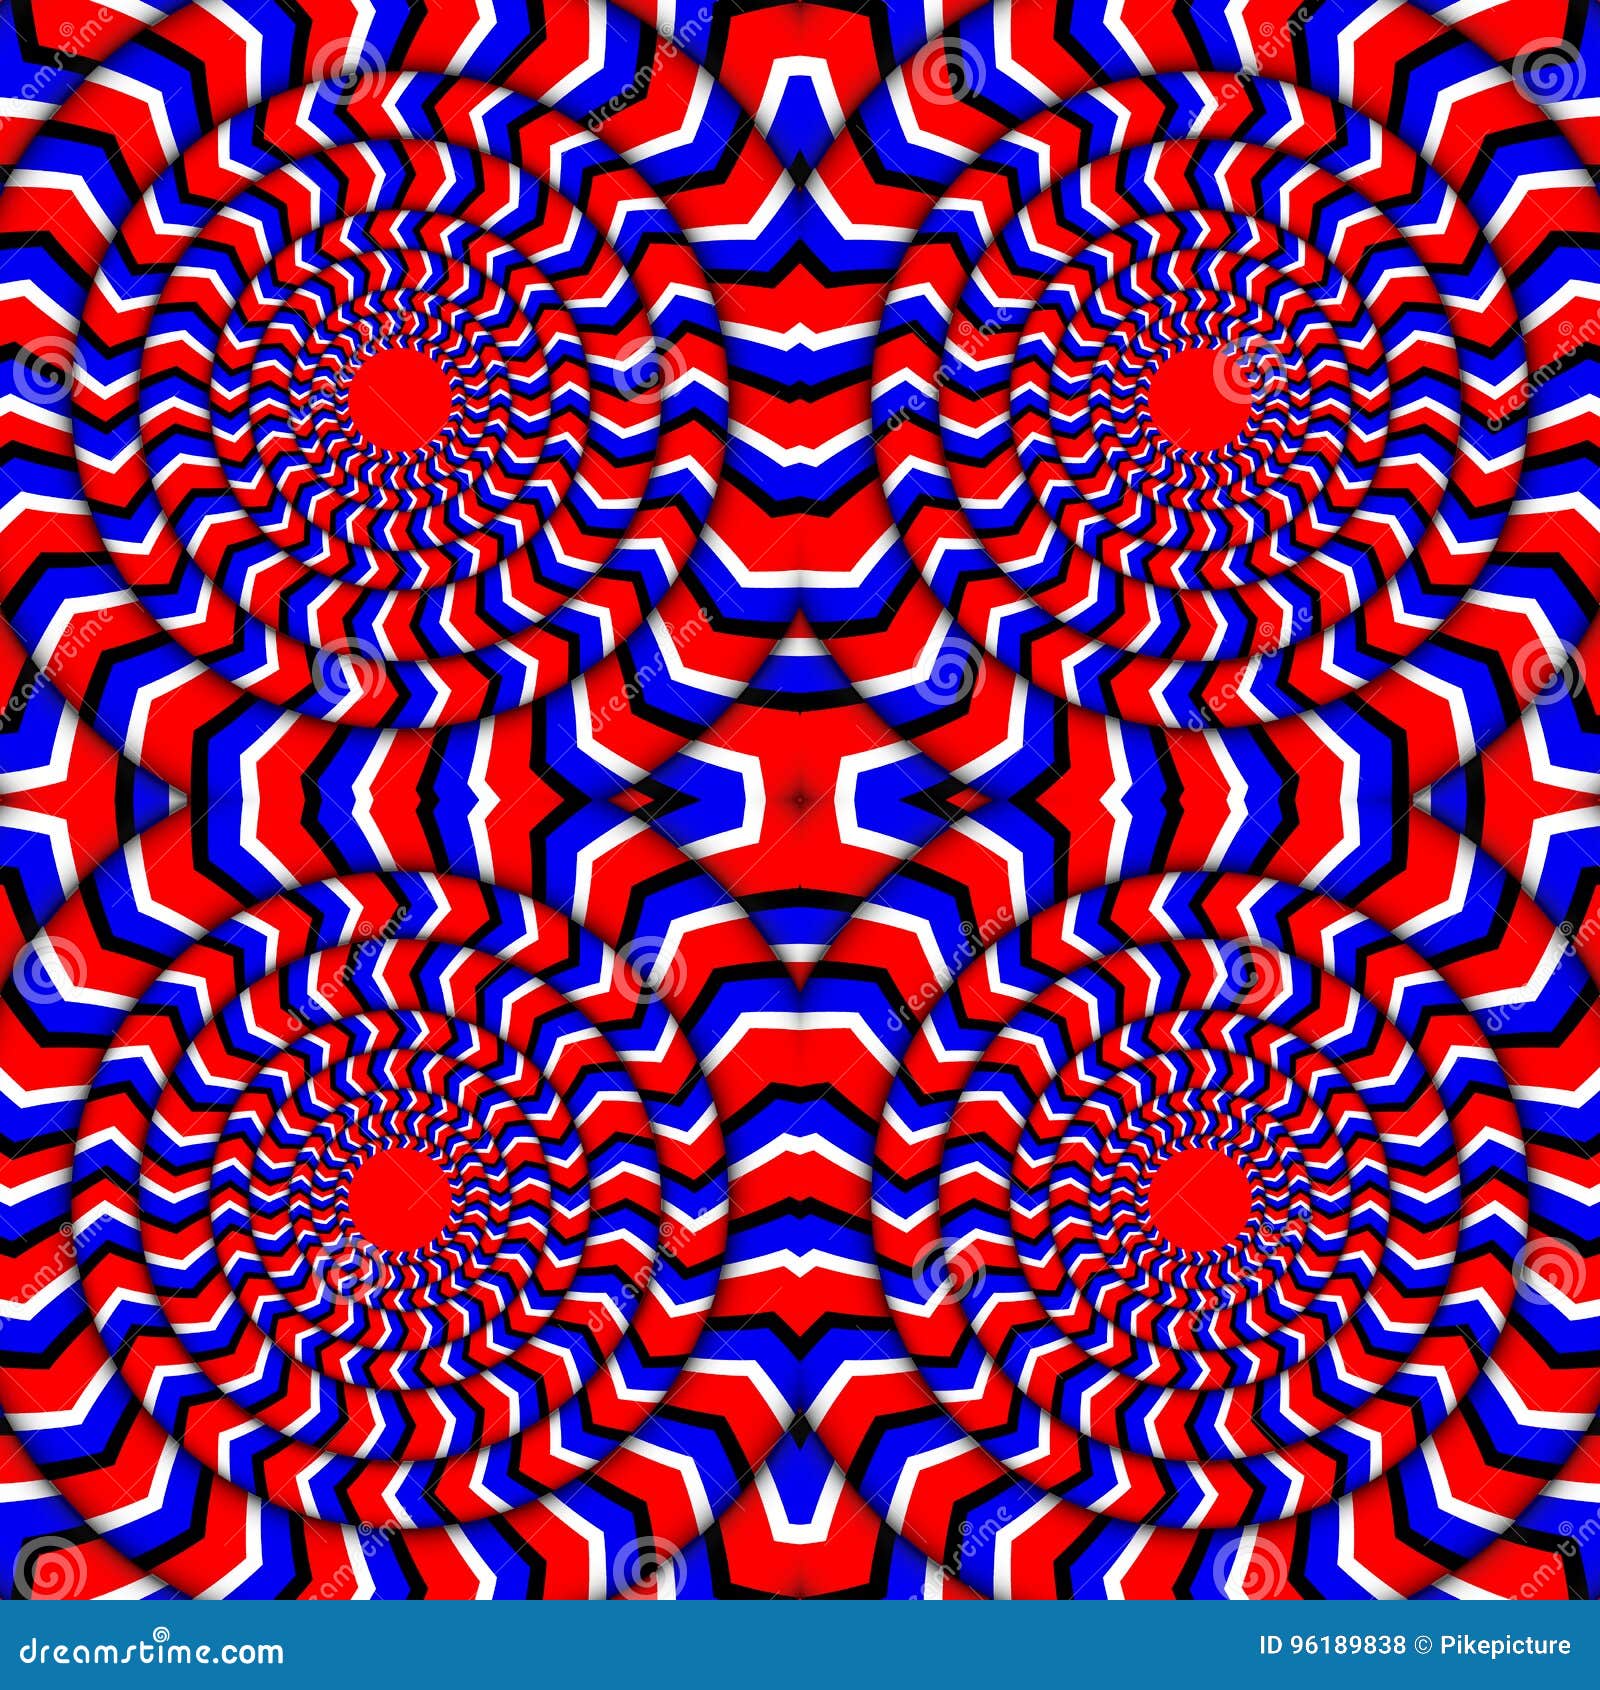 hypnotic of rotation. perpetual rotation illusion. background with bright optical illusions of rotation. optical